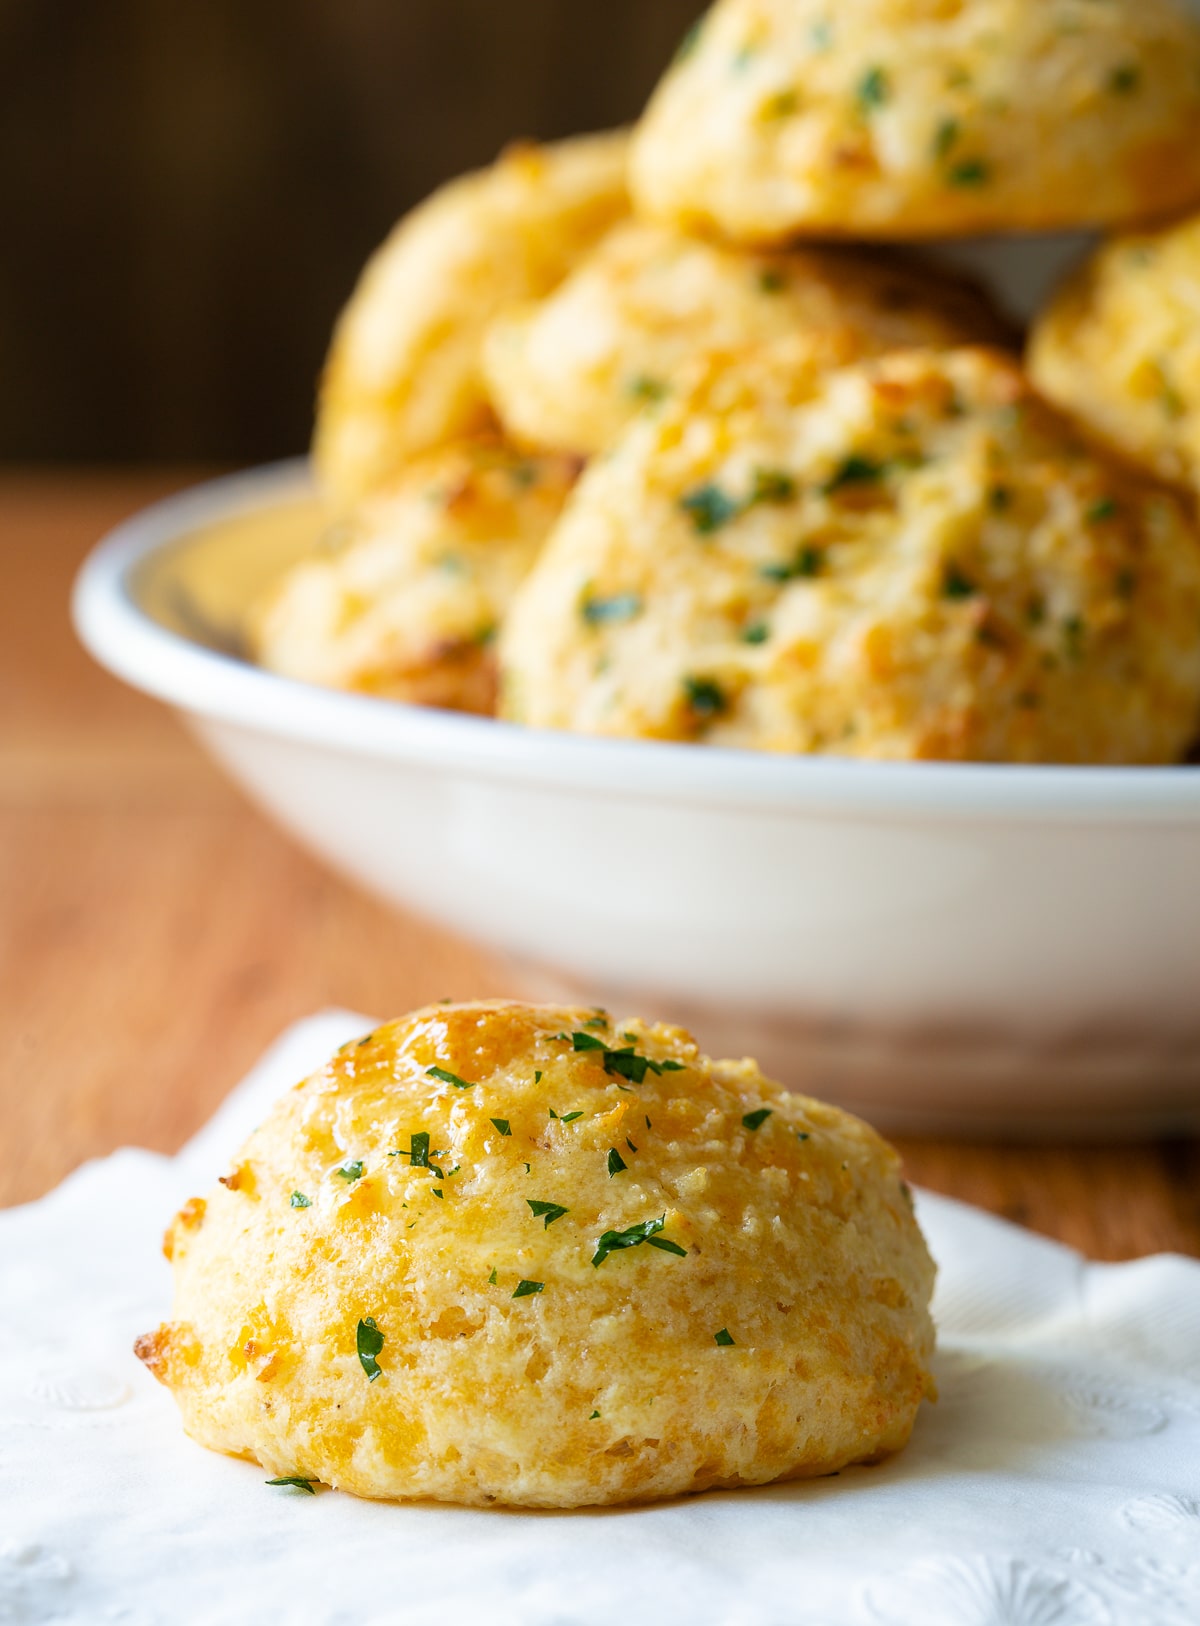 Easy Cheddar Garlic Biscuits with Old Bay Seasoning on #ASpicyPerspective #biscuits #recipe